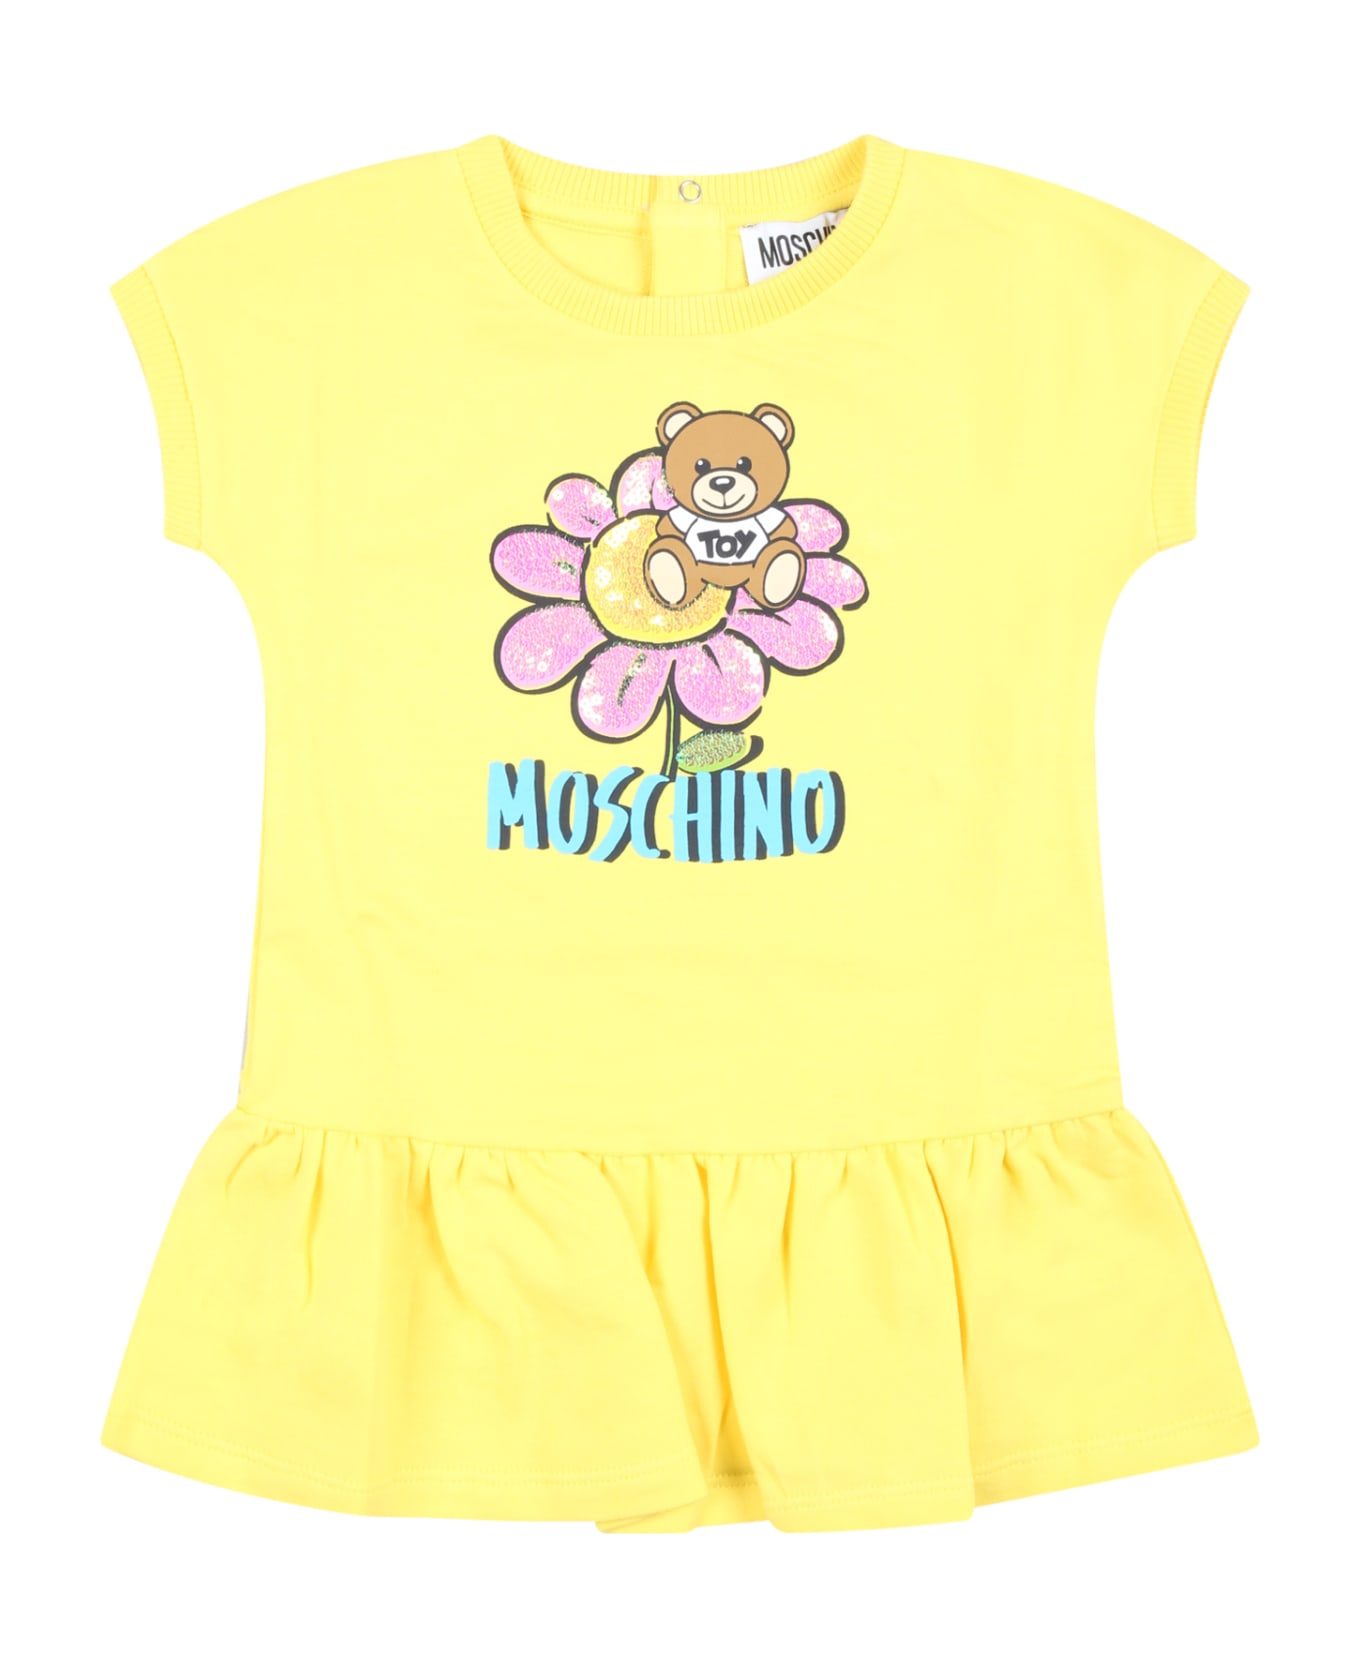 Moschino Yellow Dress For Baby Girl With Teddy Bear And Flowers - Yellow